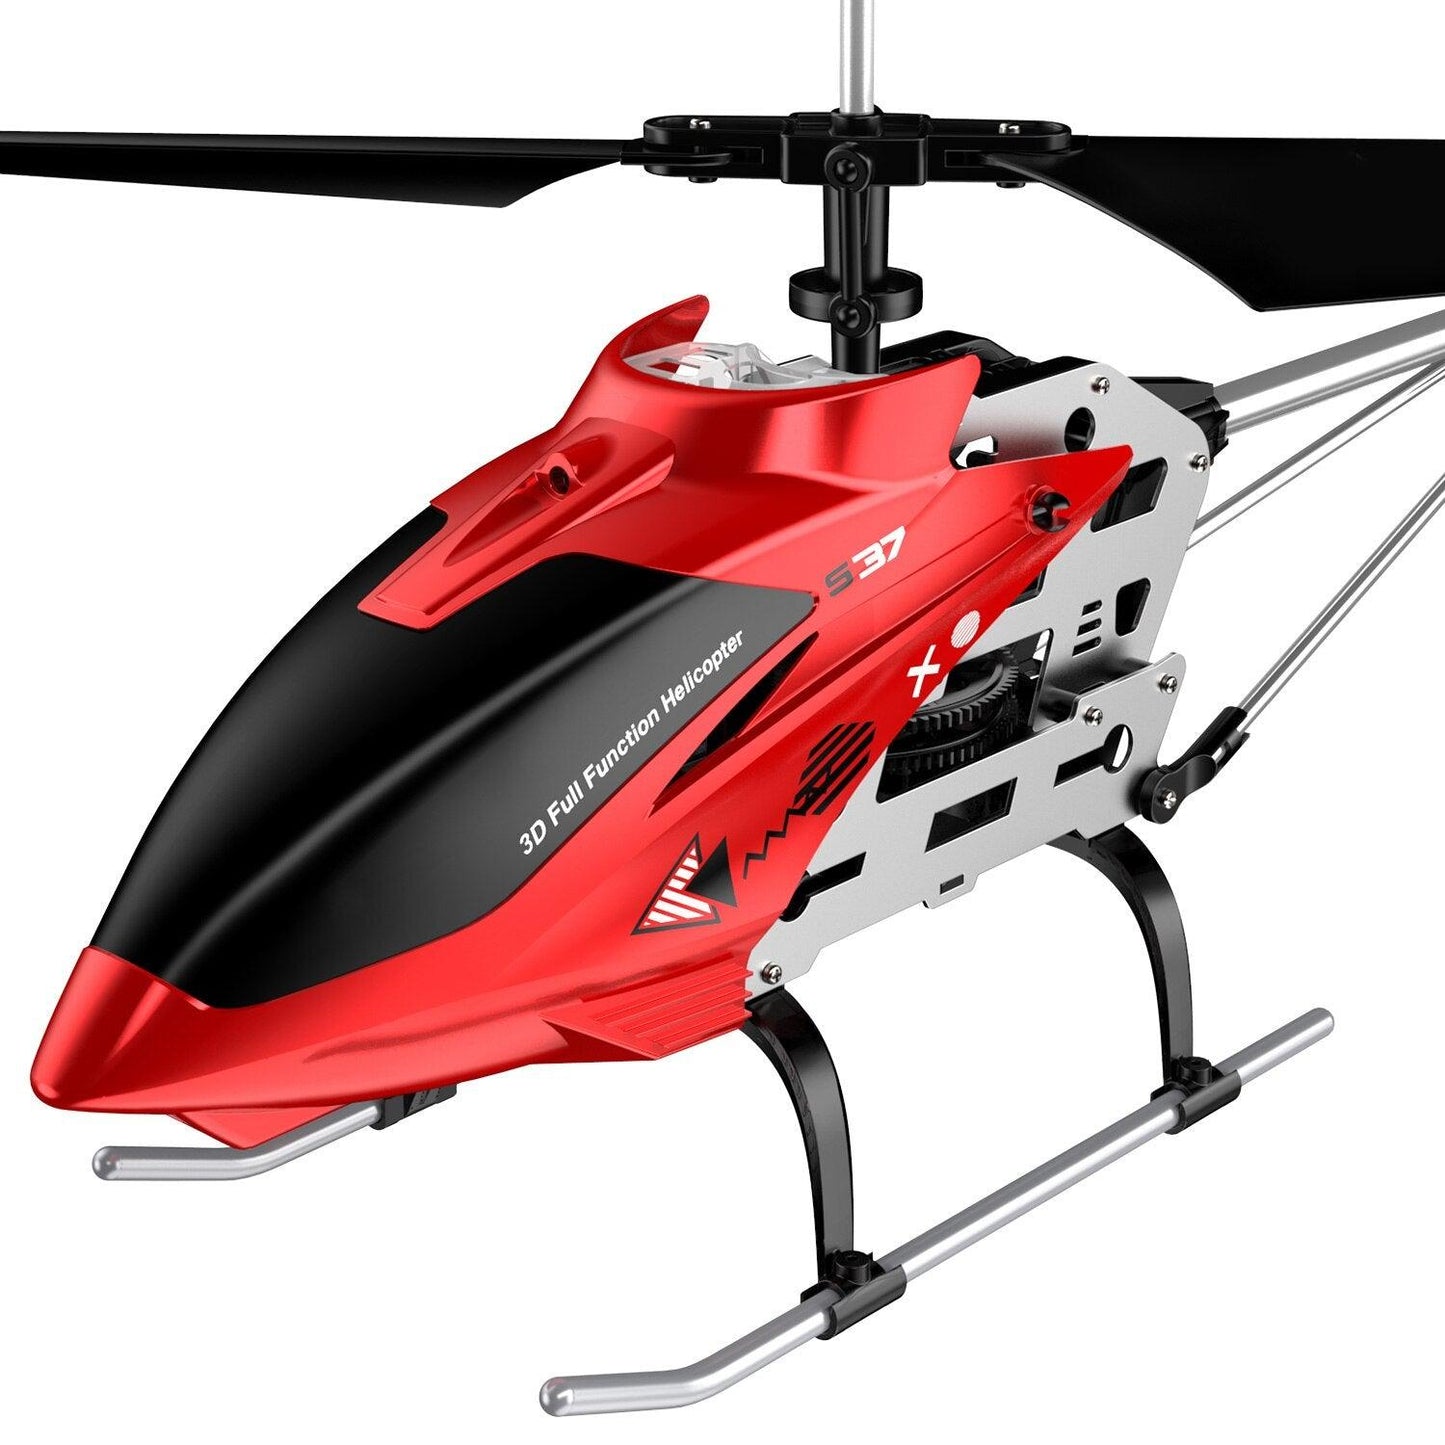 SYMA RC Helicopter S37 Aircraft - with Altitude hold, 3.5 Channel, Alloy Material, Gyro Stabilizer Toy for Kids Beginners Indoor - RCDrone